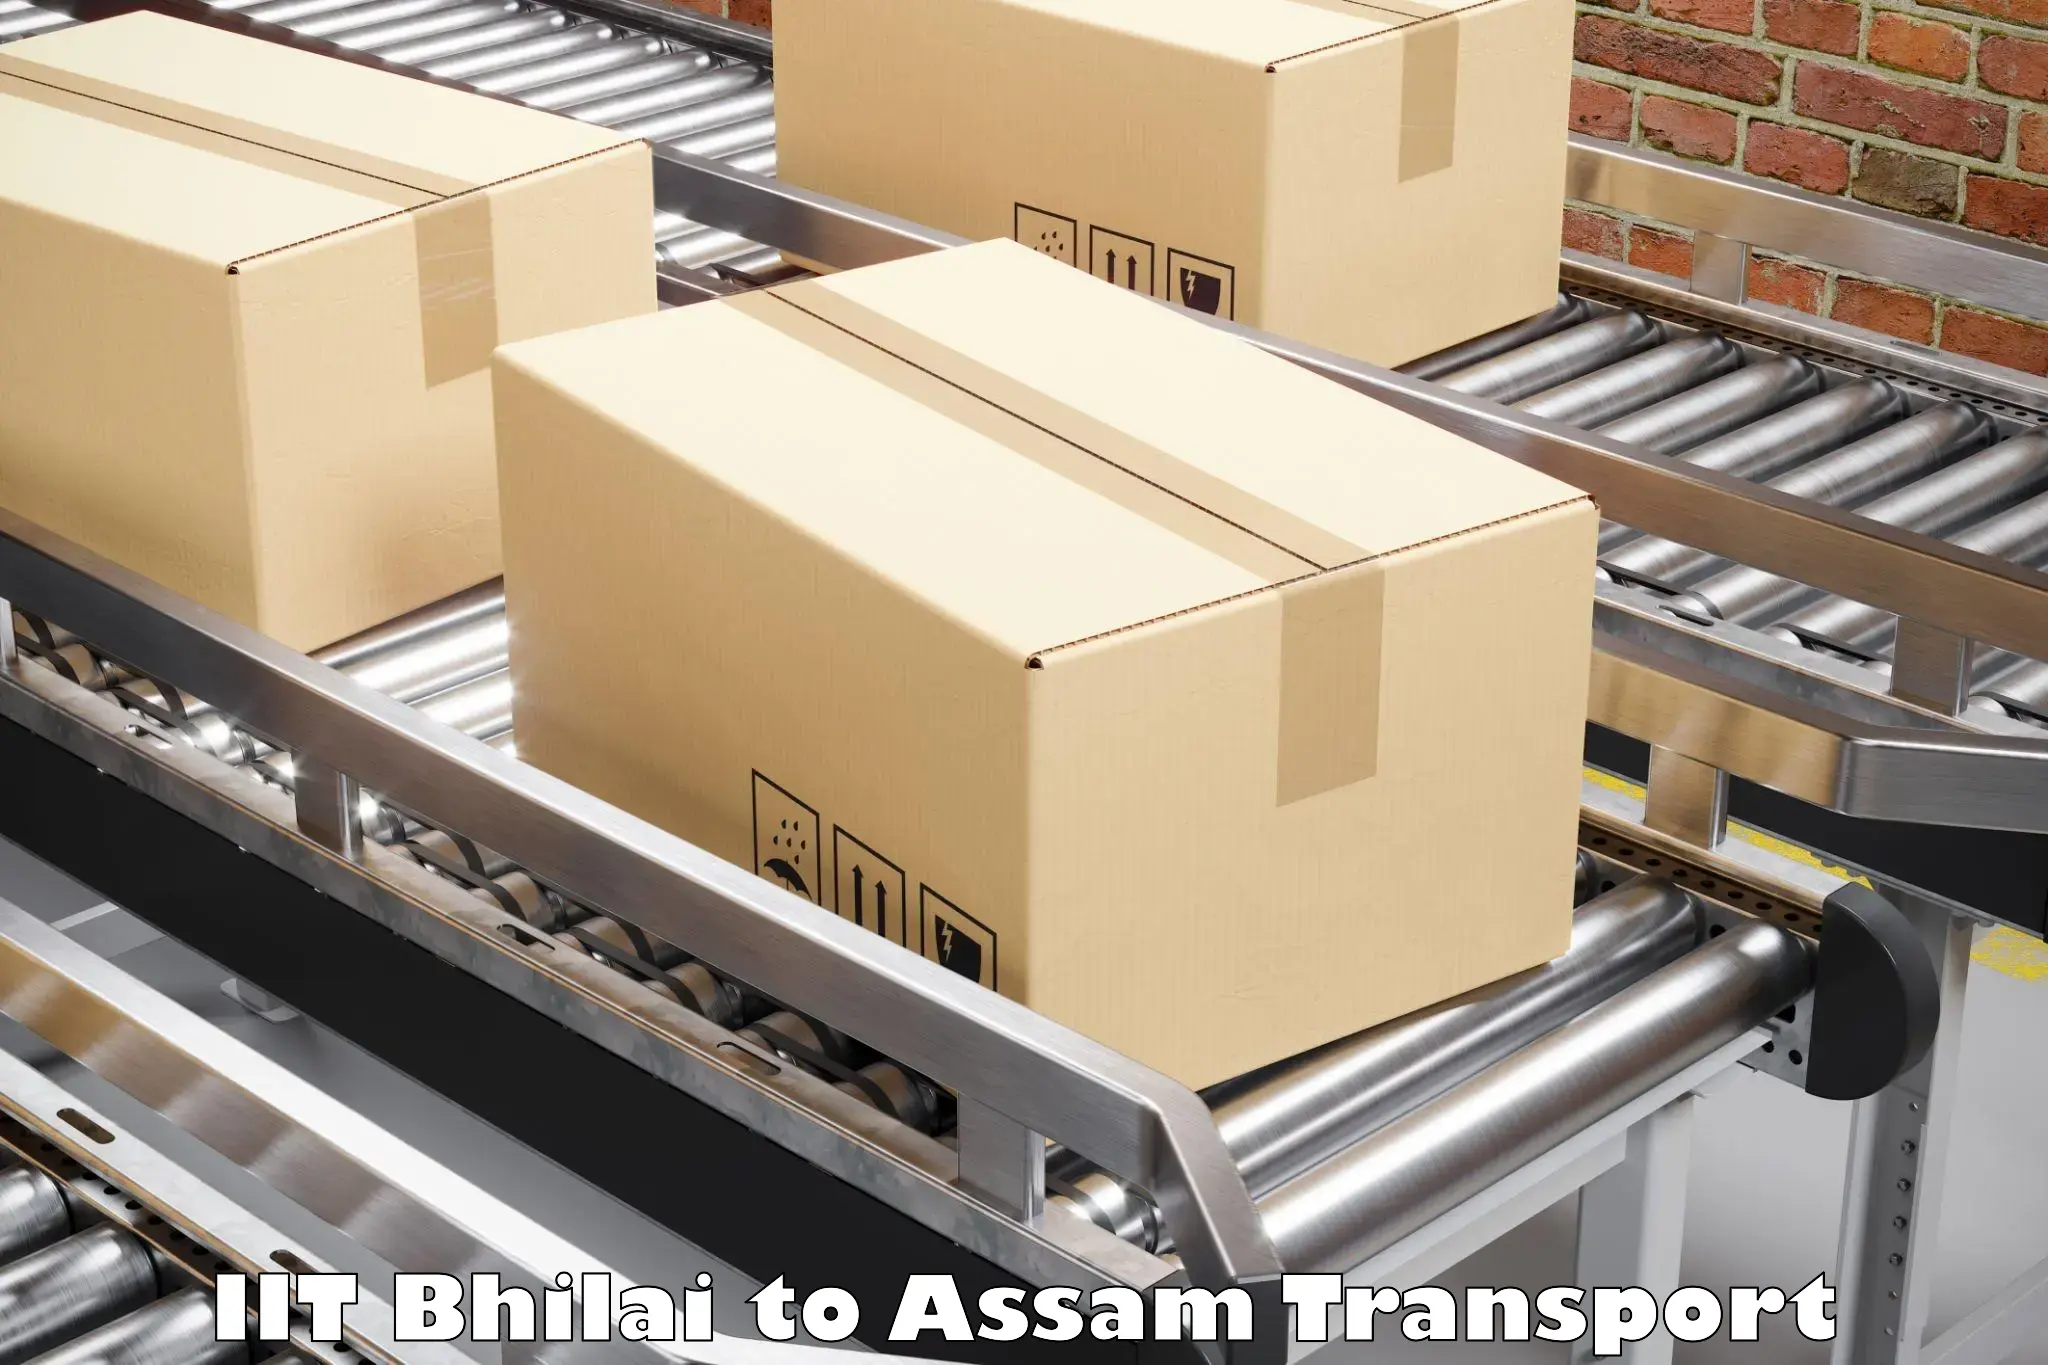 Cycle transportation service IIT Bhilai to Assam